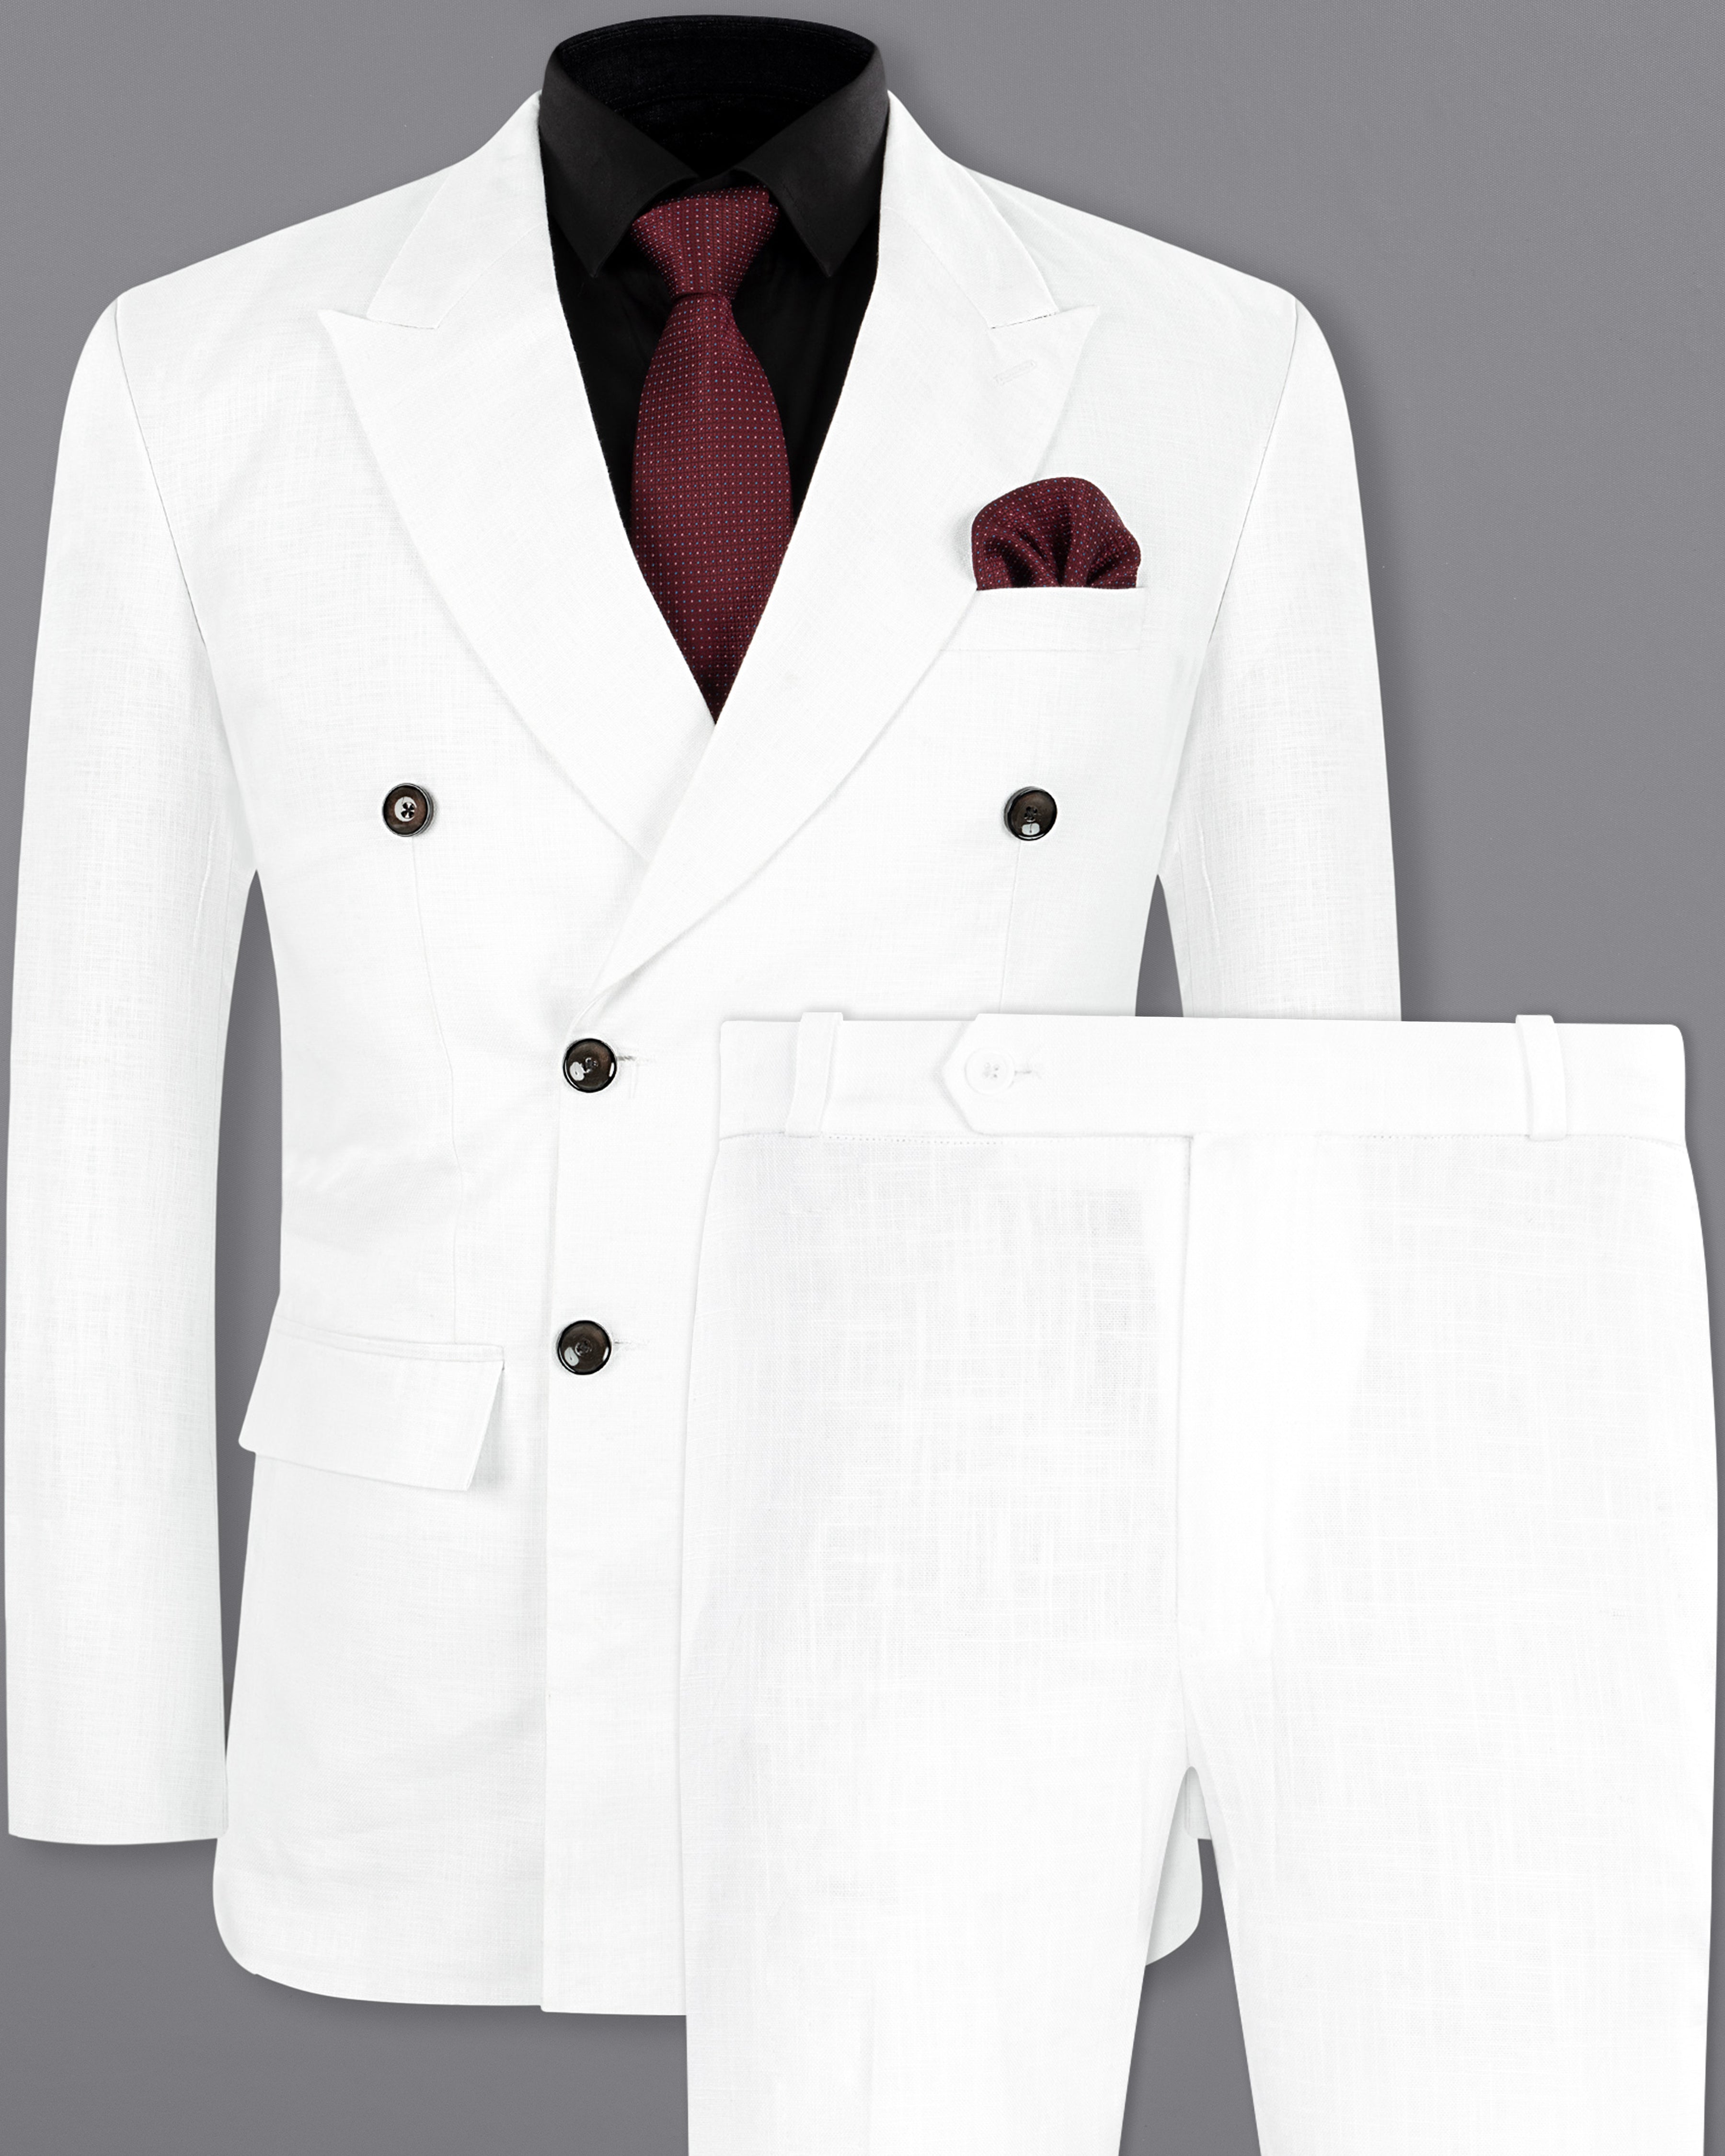 BRIGHT WHITE LUXURIOUS LINEN DOUBLE BREASTED PERFORMANCE SUIT